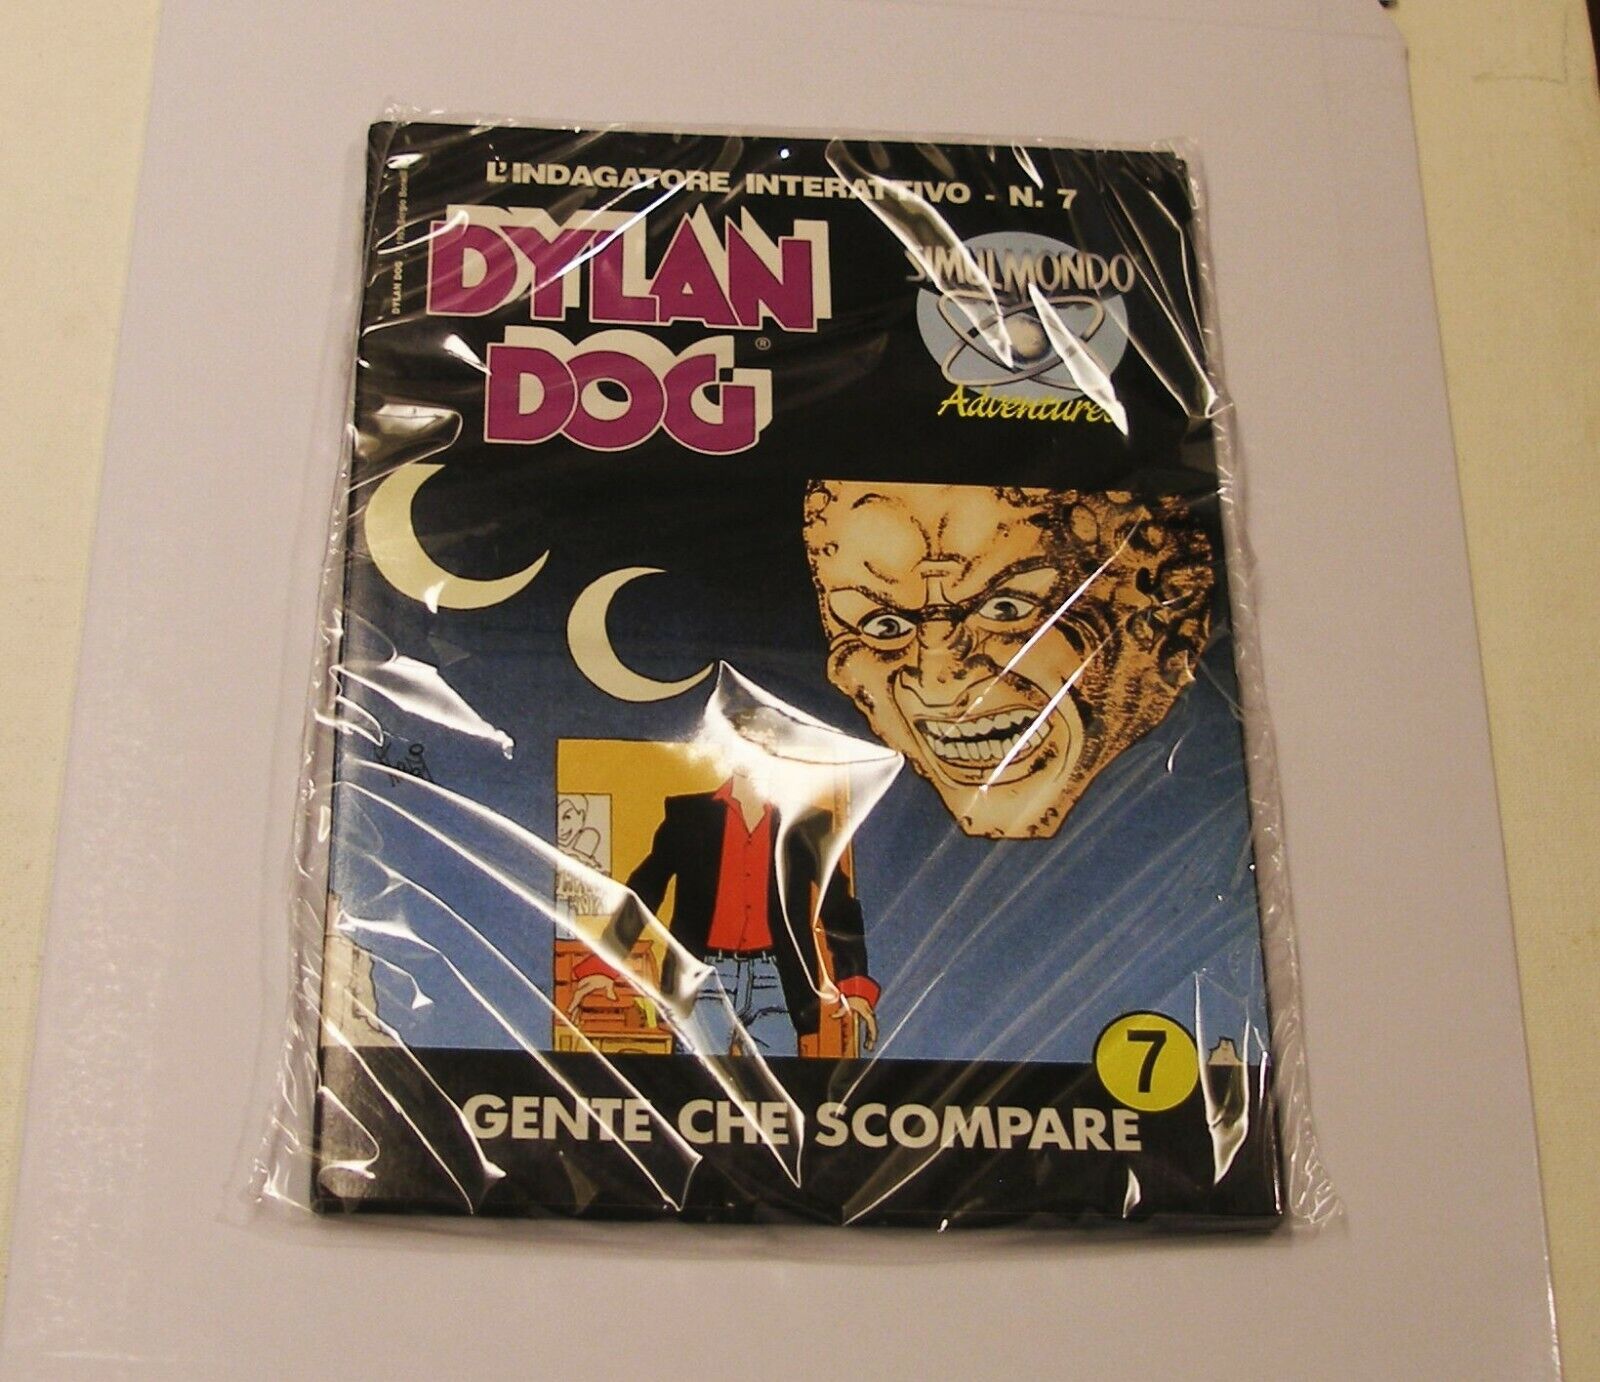 EXTREMELY RARE: Dylan Dog # 07: Gente Che Scompare by Simulmondo for Amiga - NEW